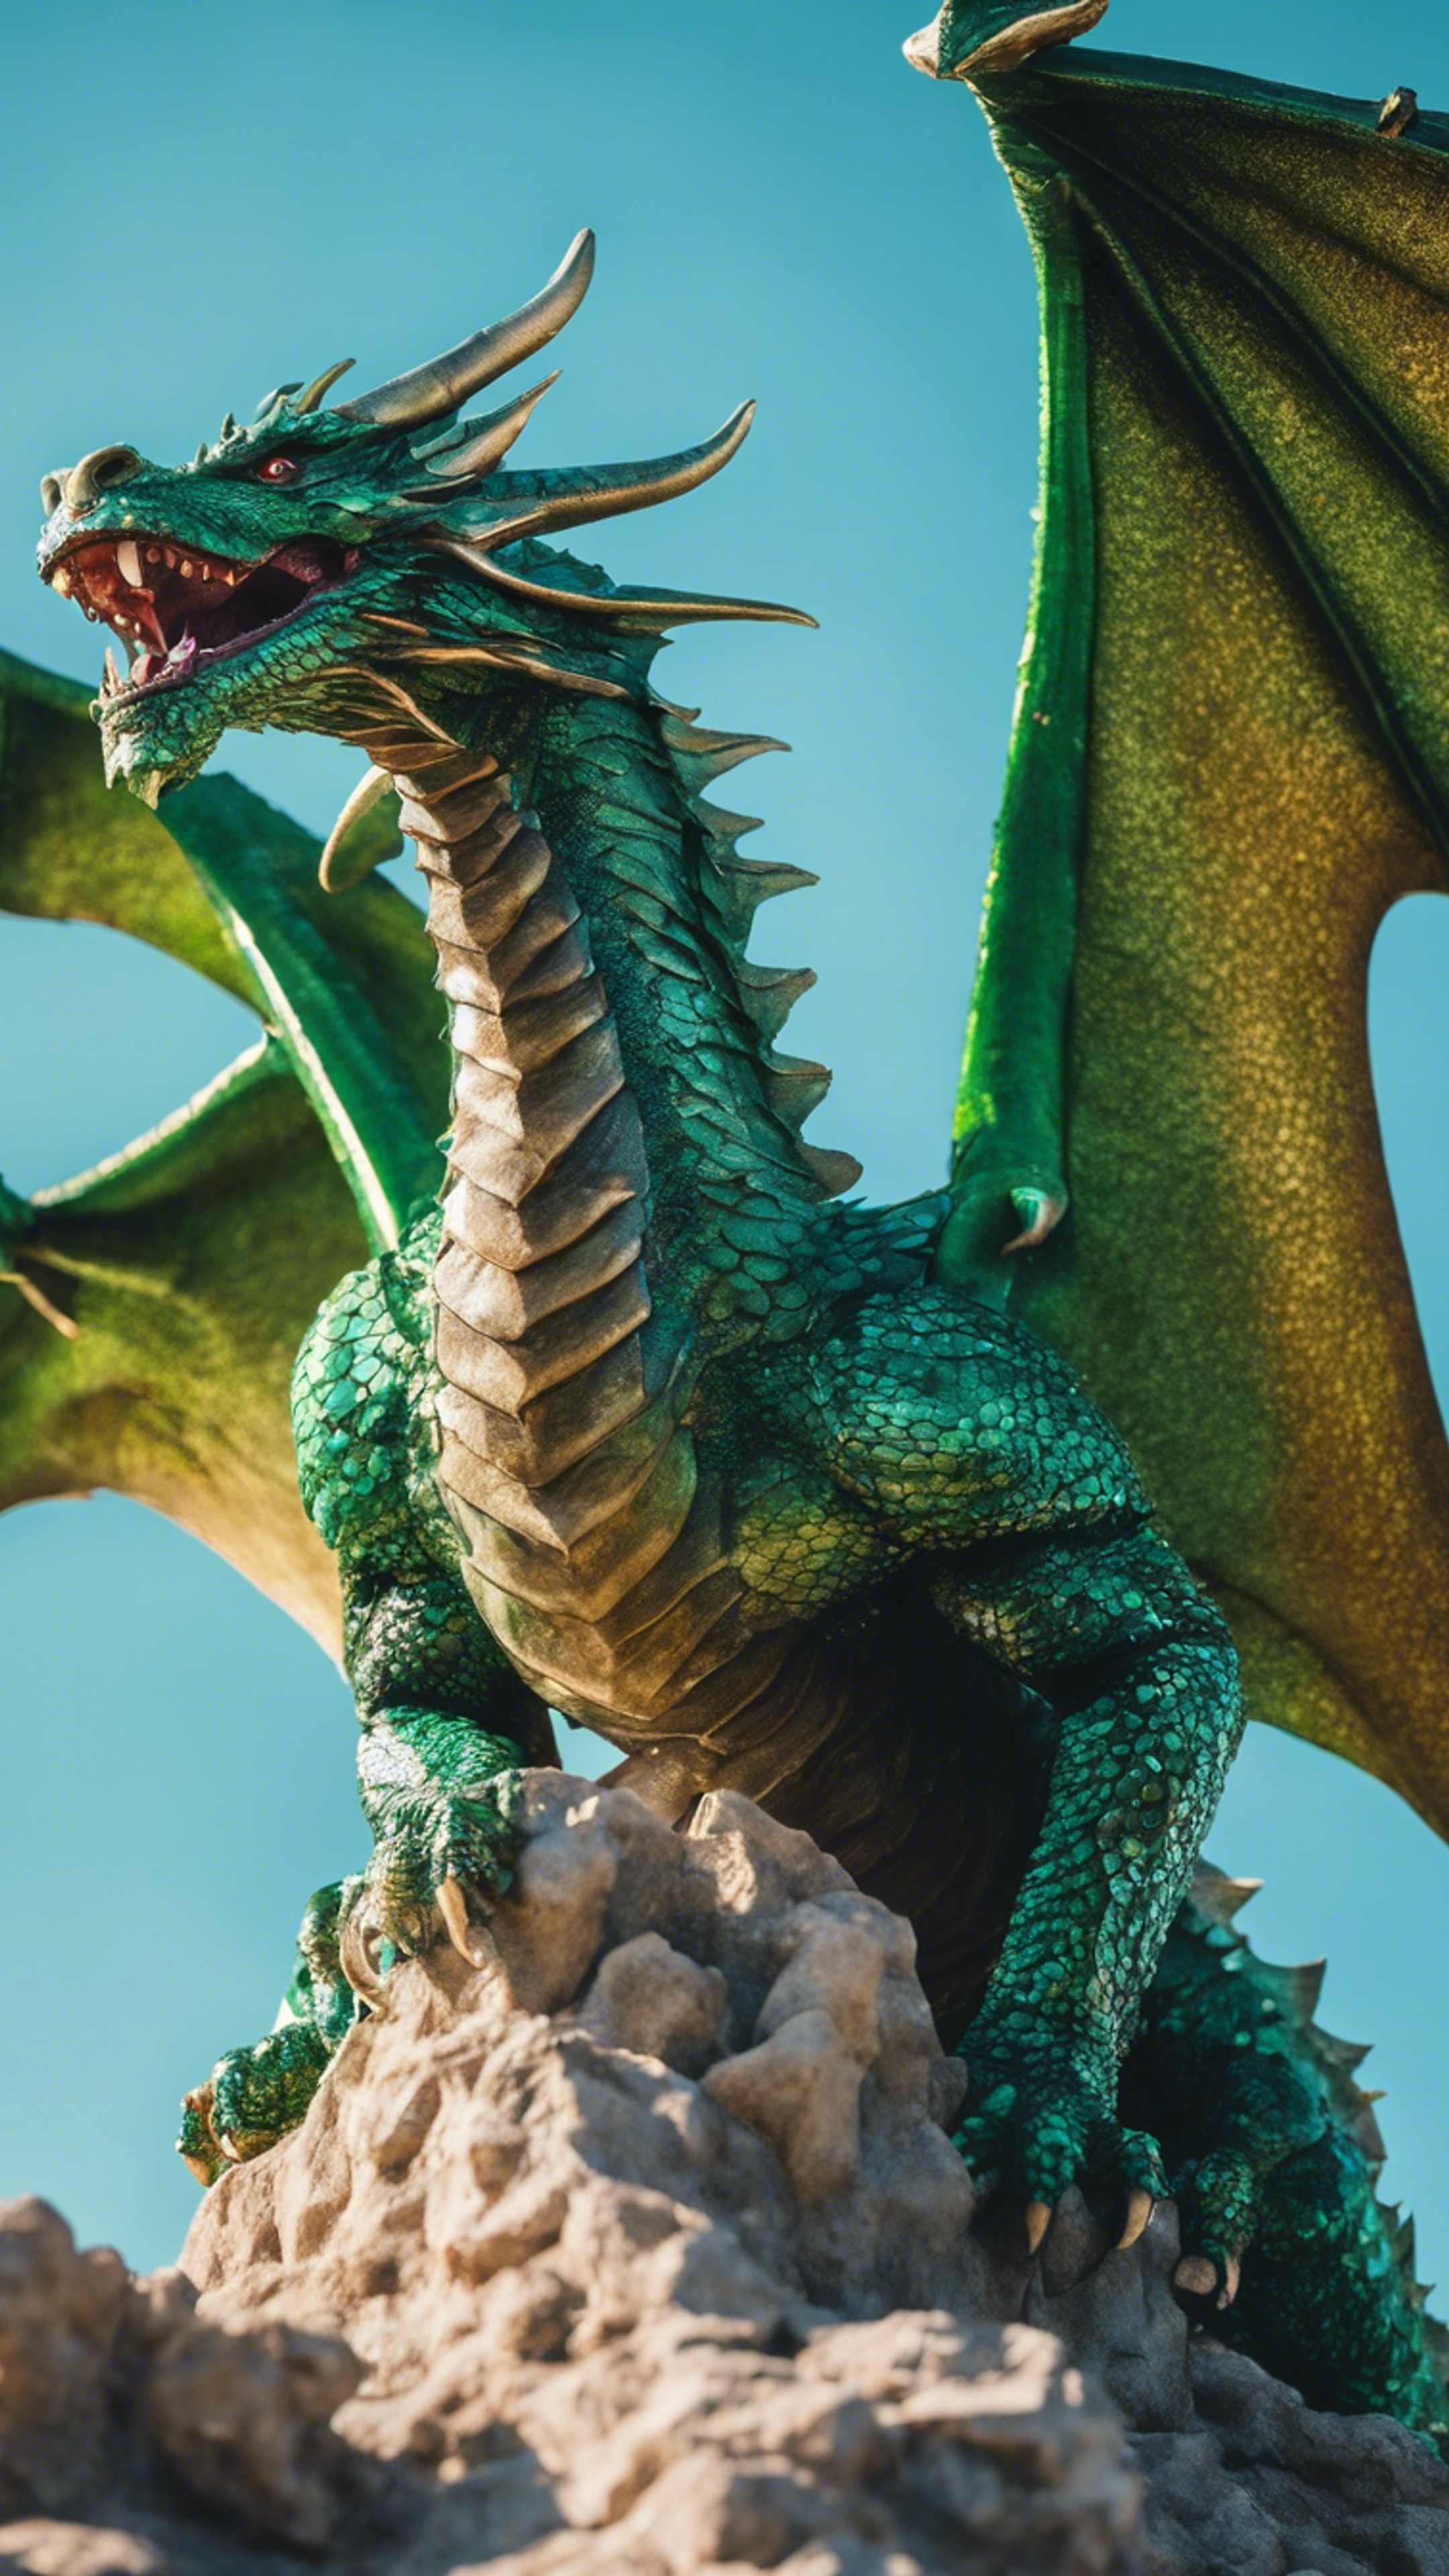 A majestic dragon with emerald green scales soaring in a clear blue sky. Wallpaper[17ffd7f16aff45c0bffb]